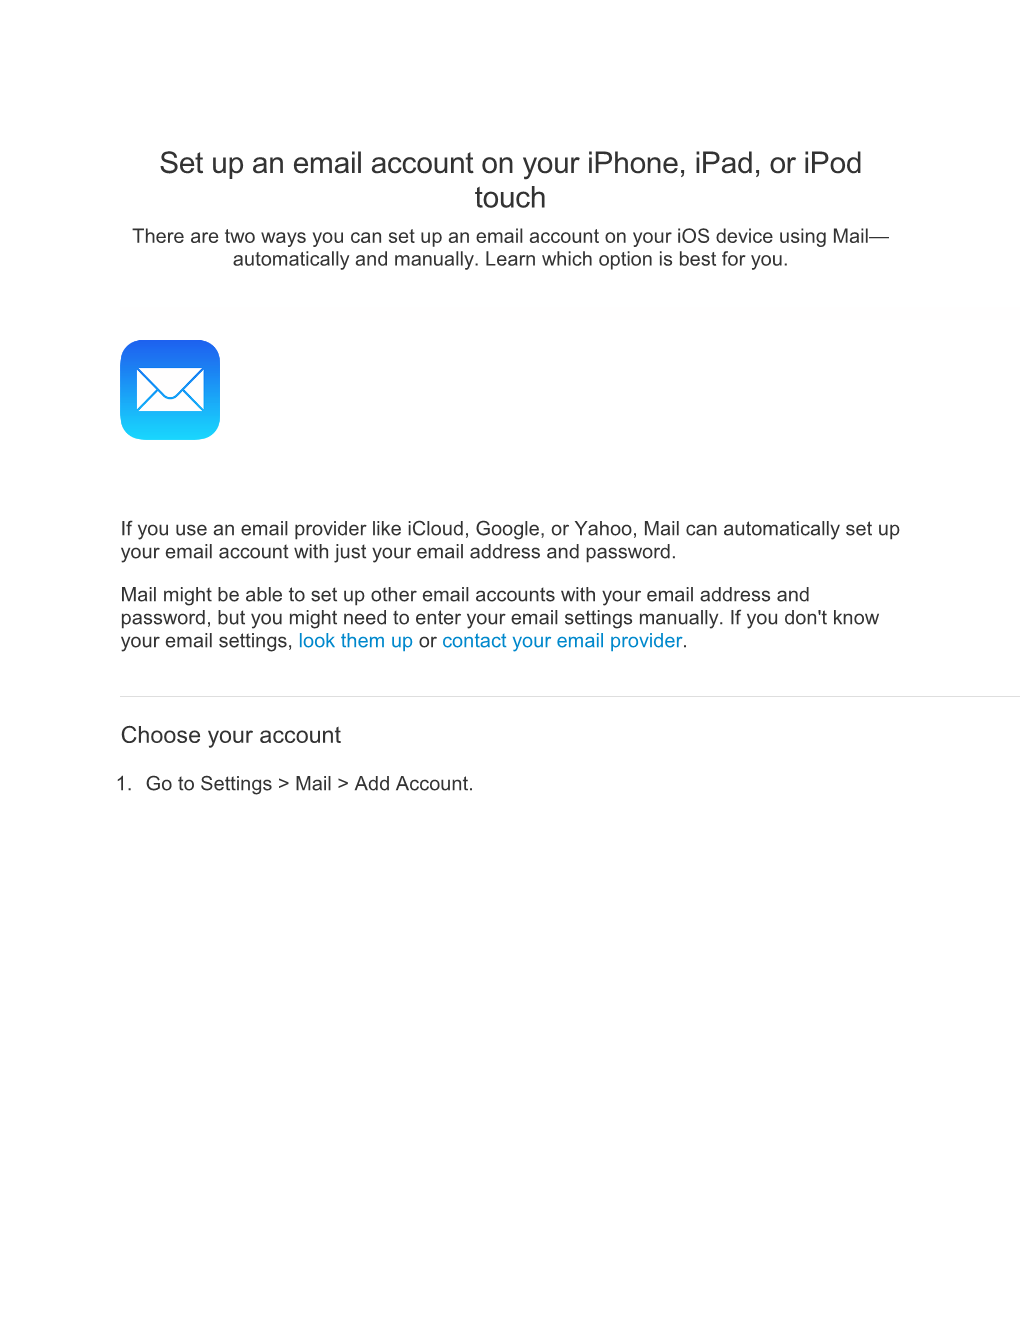 Set up an Email Account on Your Iphone, Ipad, Or Ipod Touch